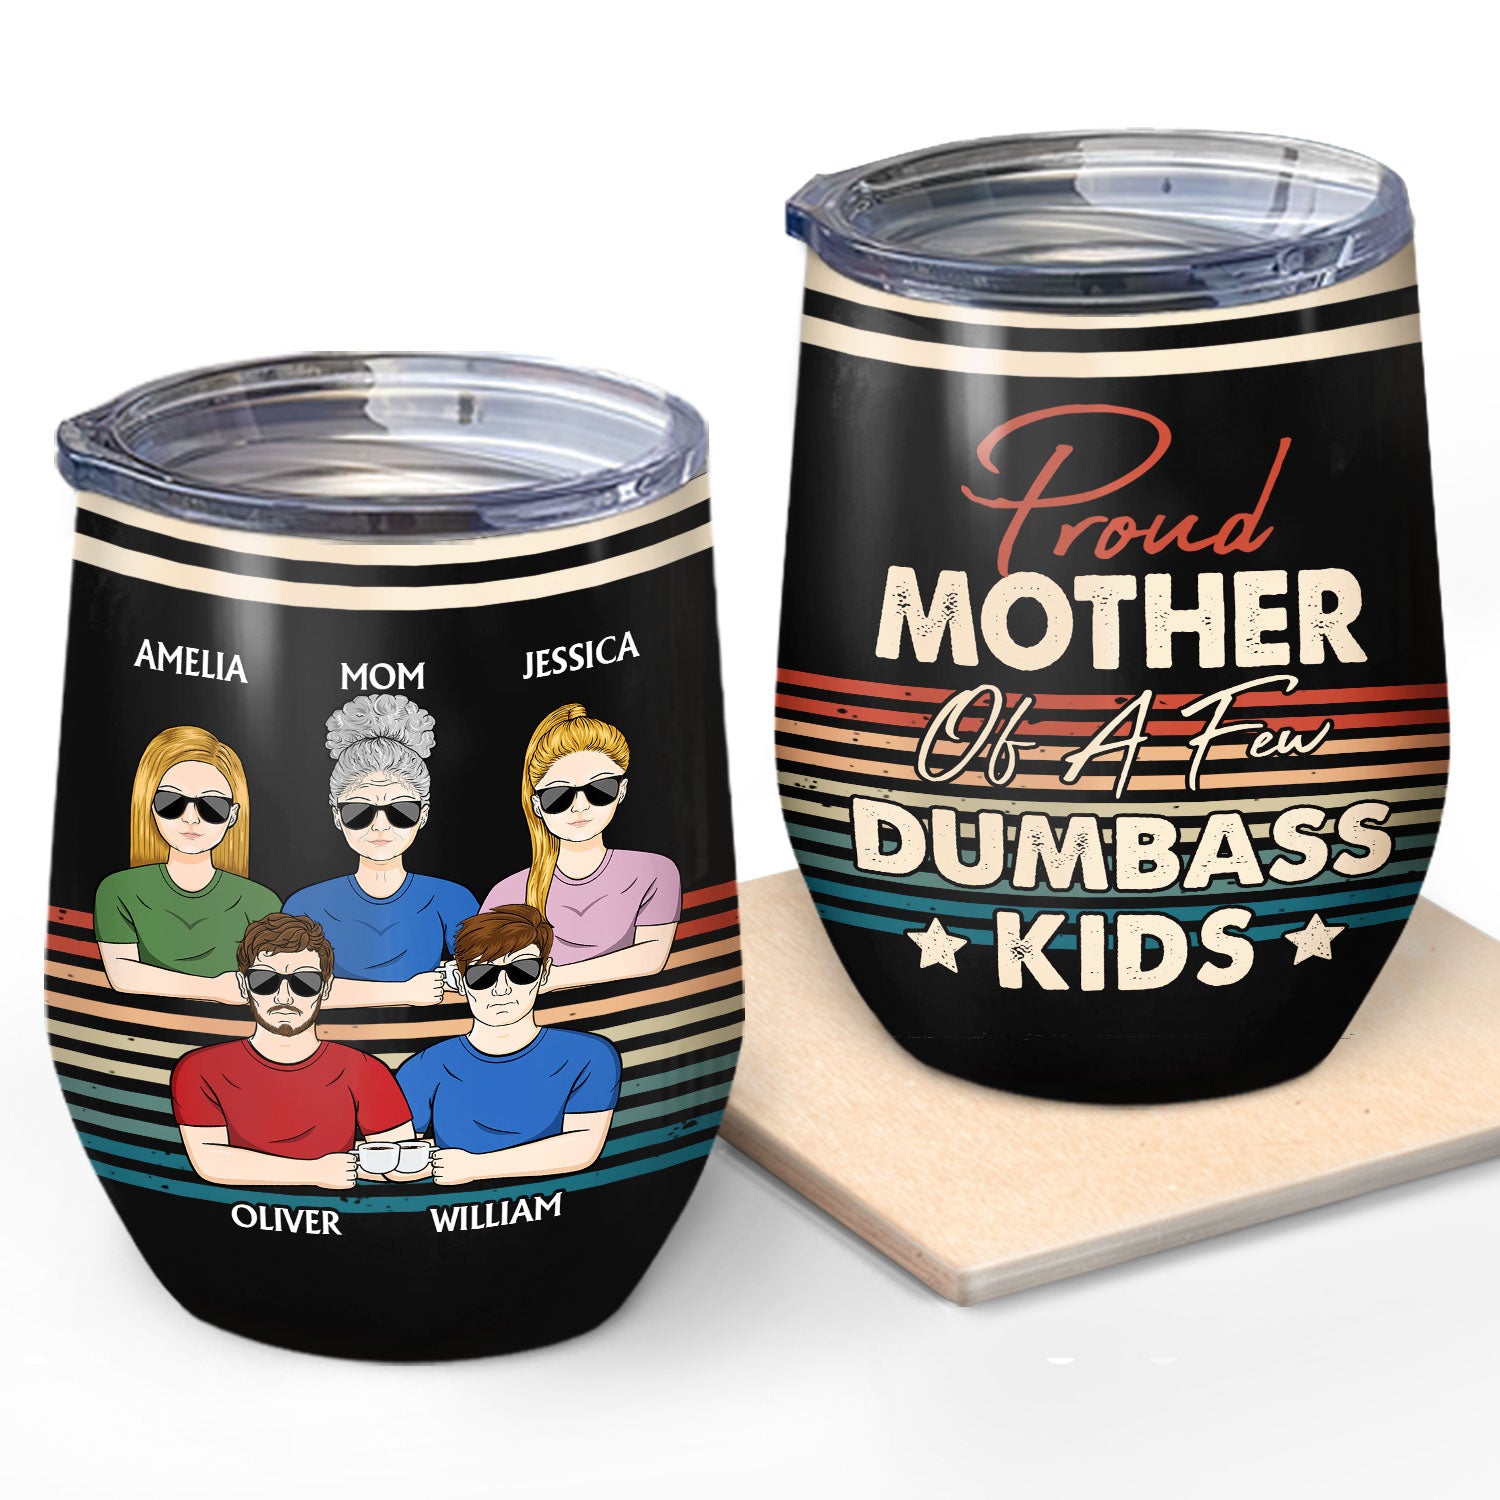 Proud Mother Of A Few Kids - Funny Gift For Mom, Mother, Grandma - Personalized Wine Tumbler